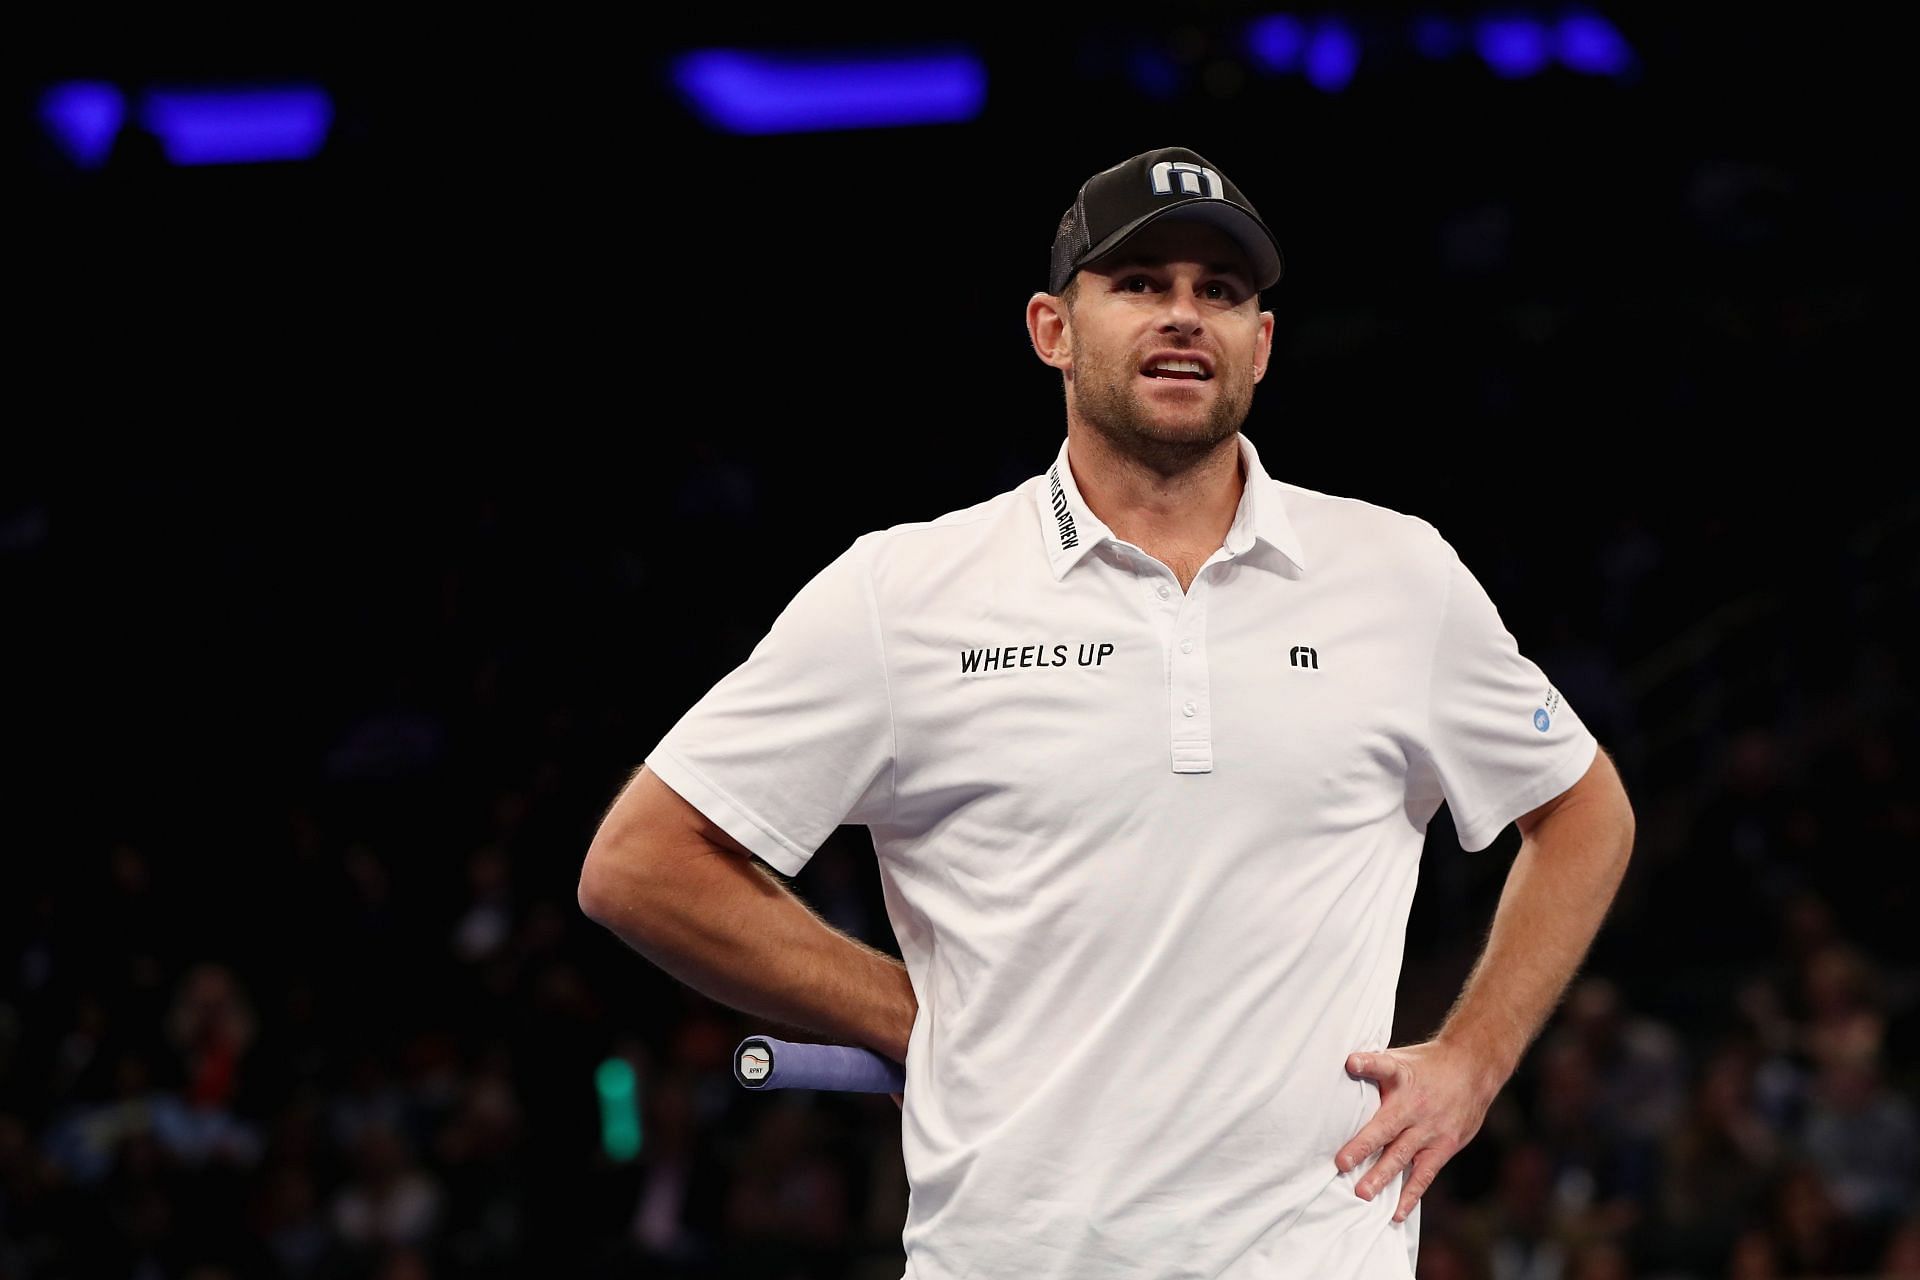 Andy Roddick during an exhibition match in 2017.